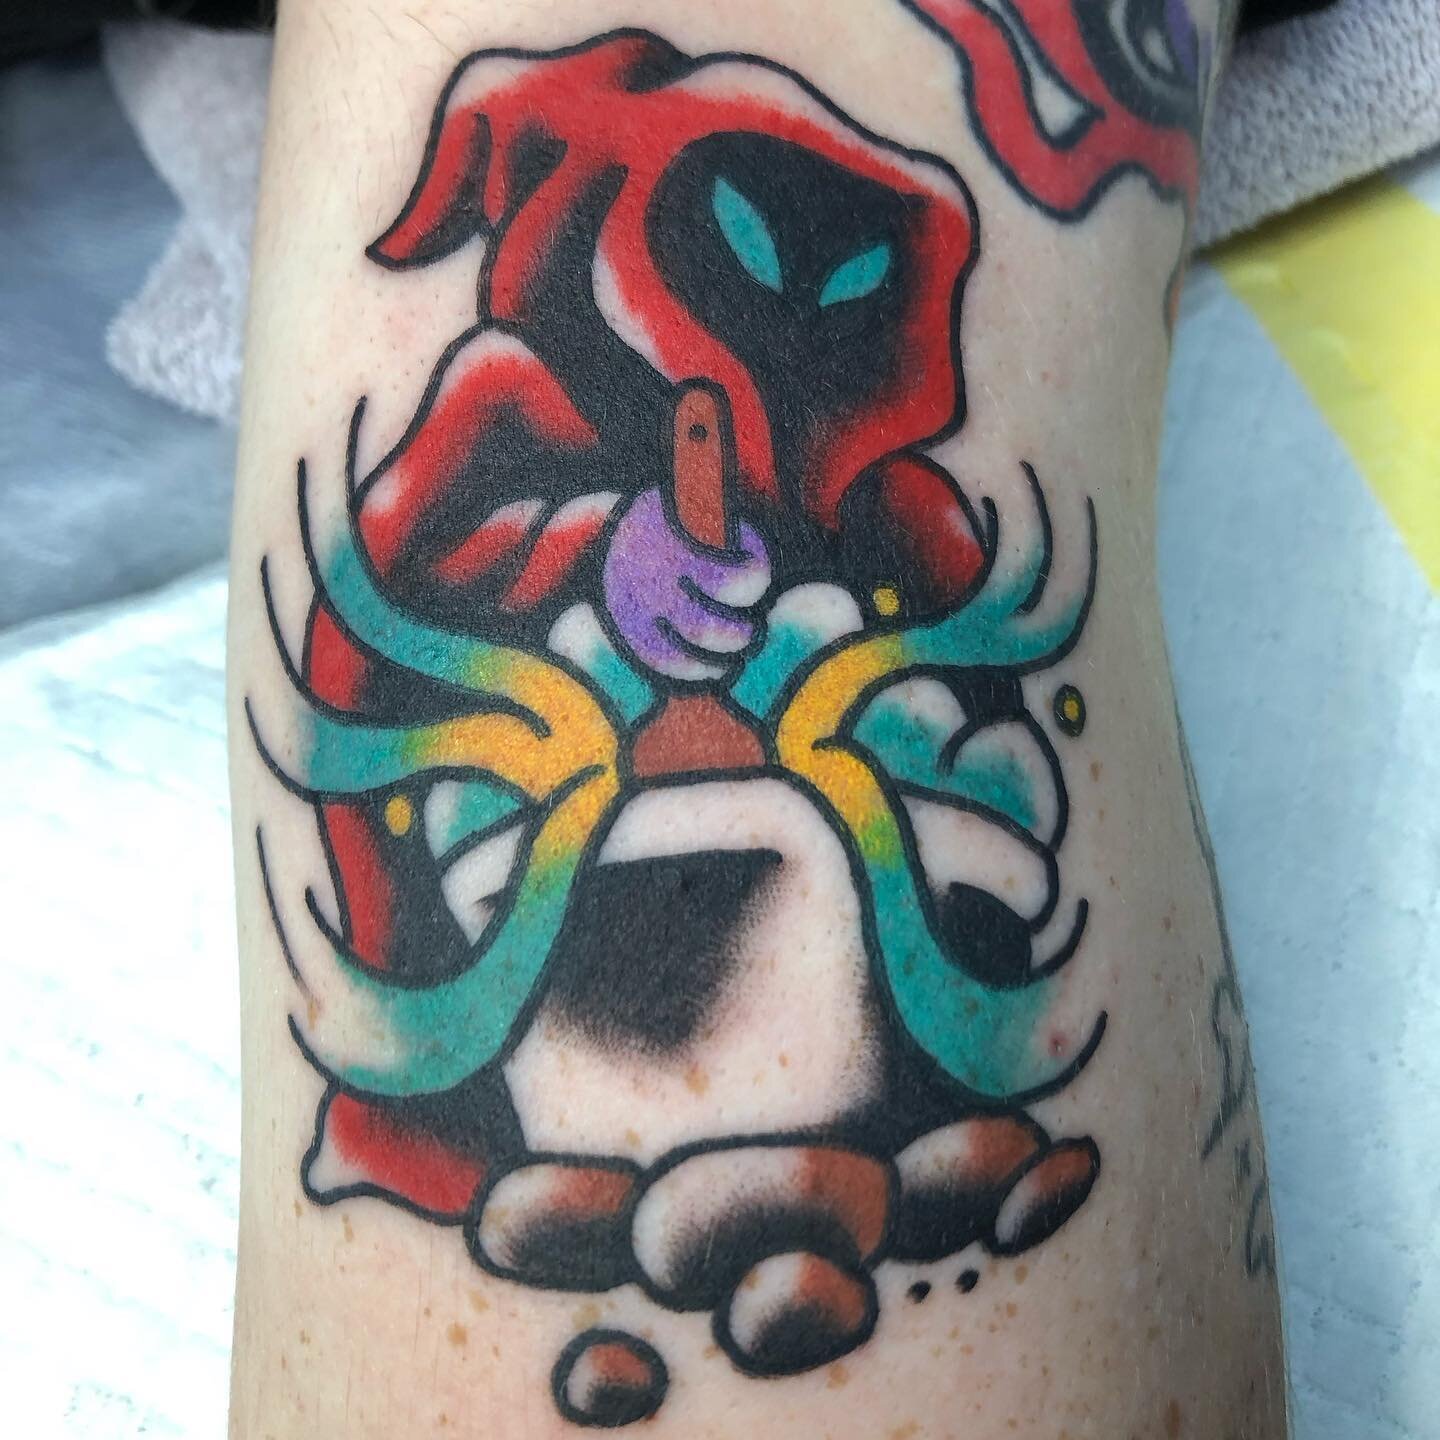 Cauldron ghoul for Ferg, thanks for picking another fun one!
DM for tattoos @houseofdaggerstattoo